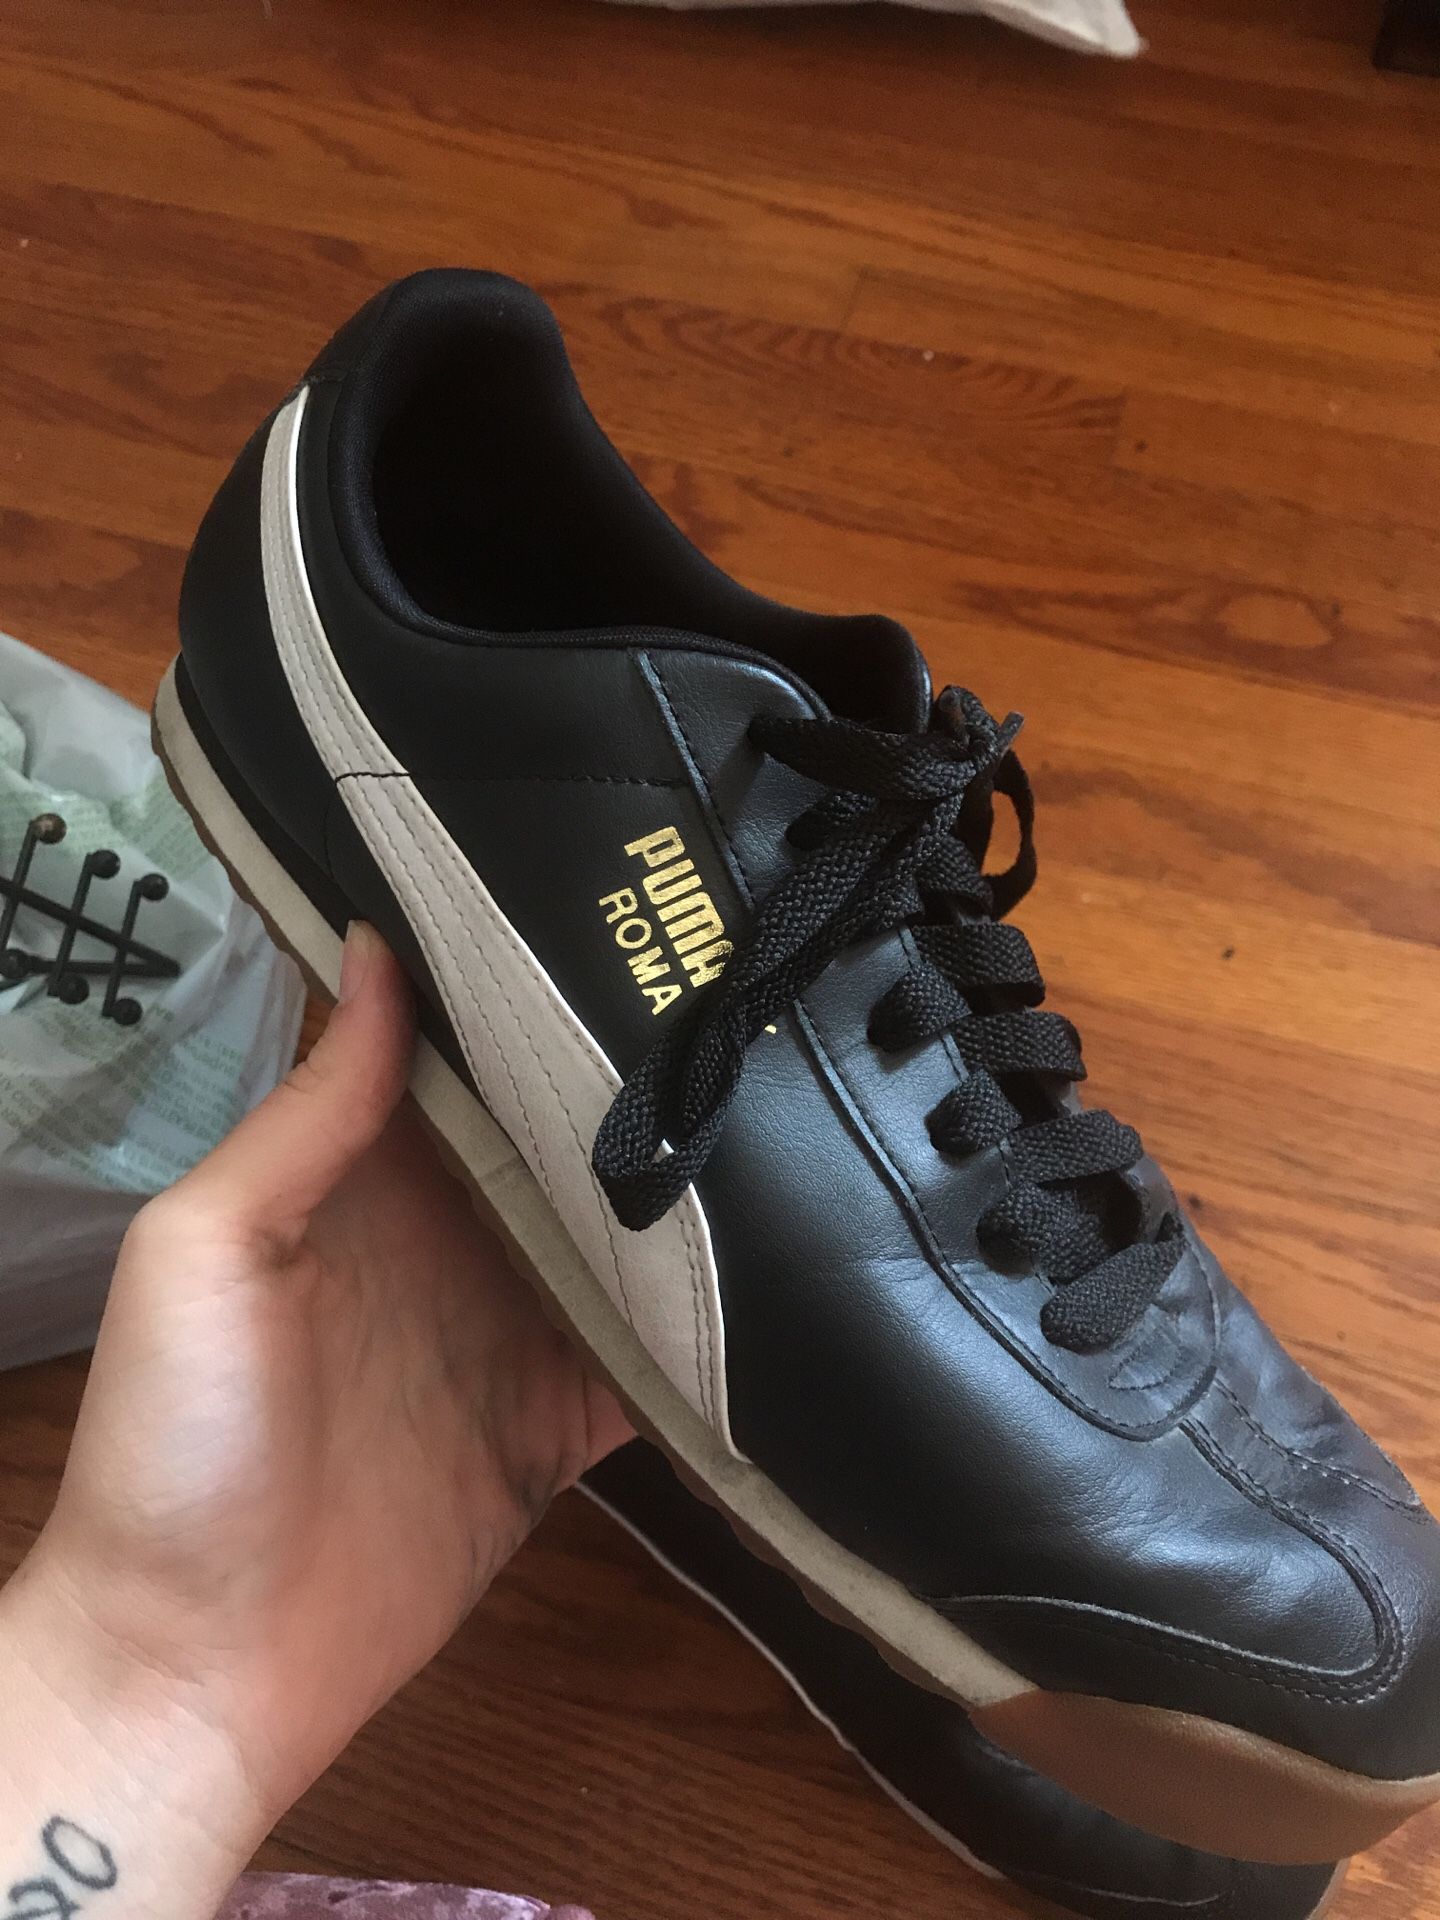 worn once indoors size 12 puma roma